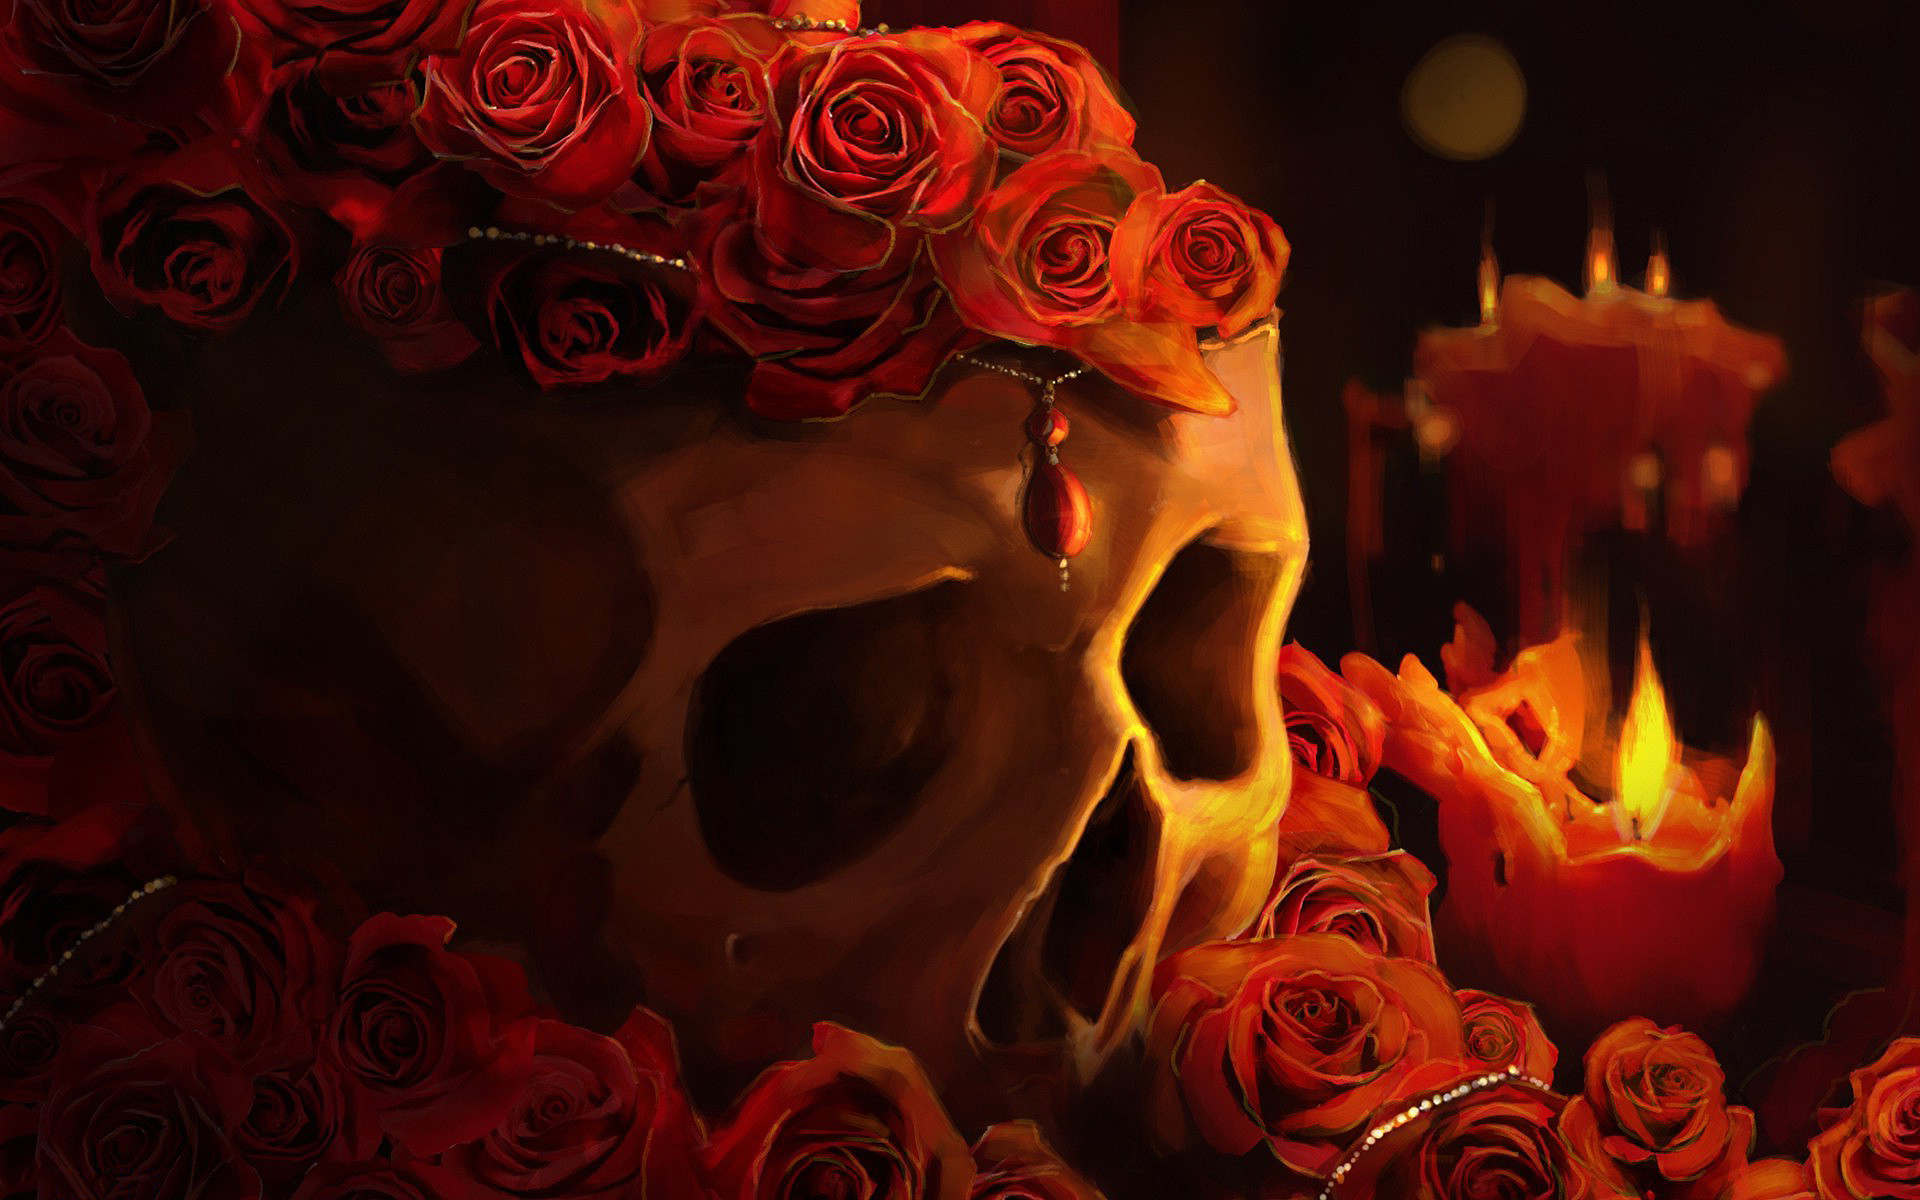 1920x1200 Red Roses Skull Wallpapers - http://hdwallpapersf.com/red-roses